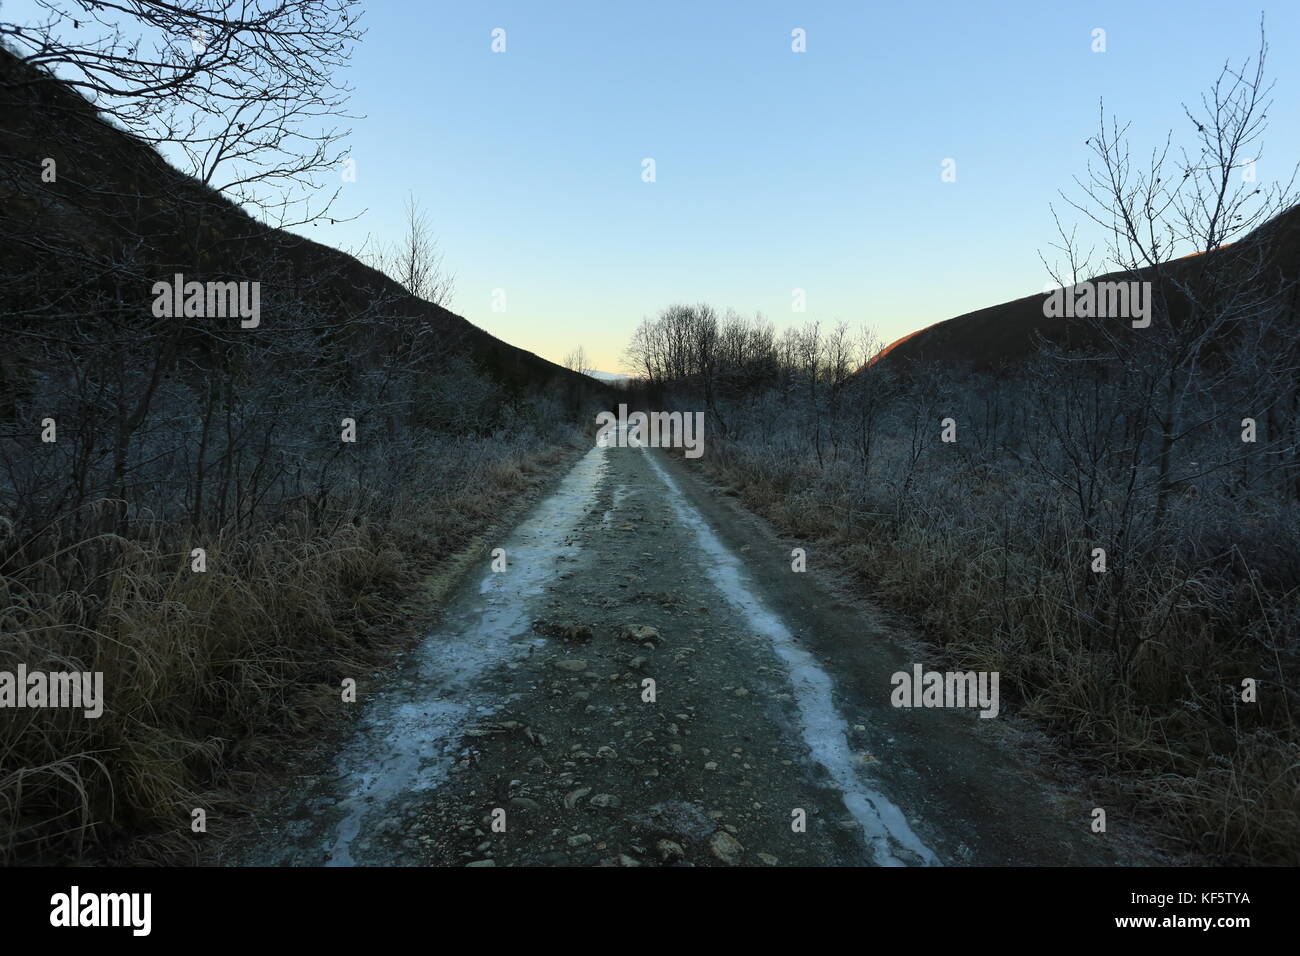 Frozen Icy Drit Road Going Trough The Forest Stock Photo